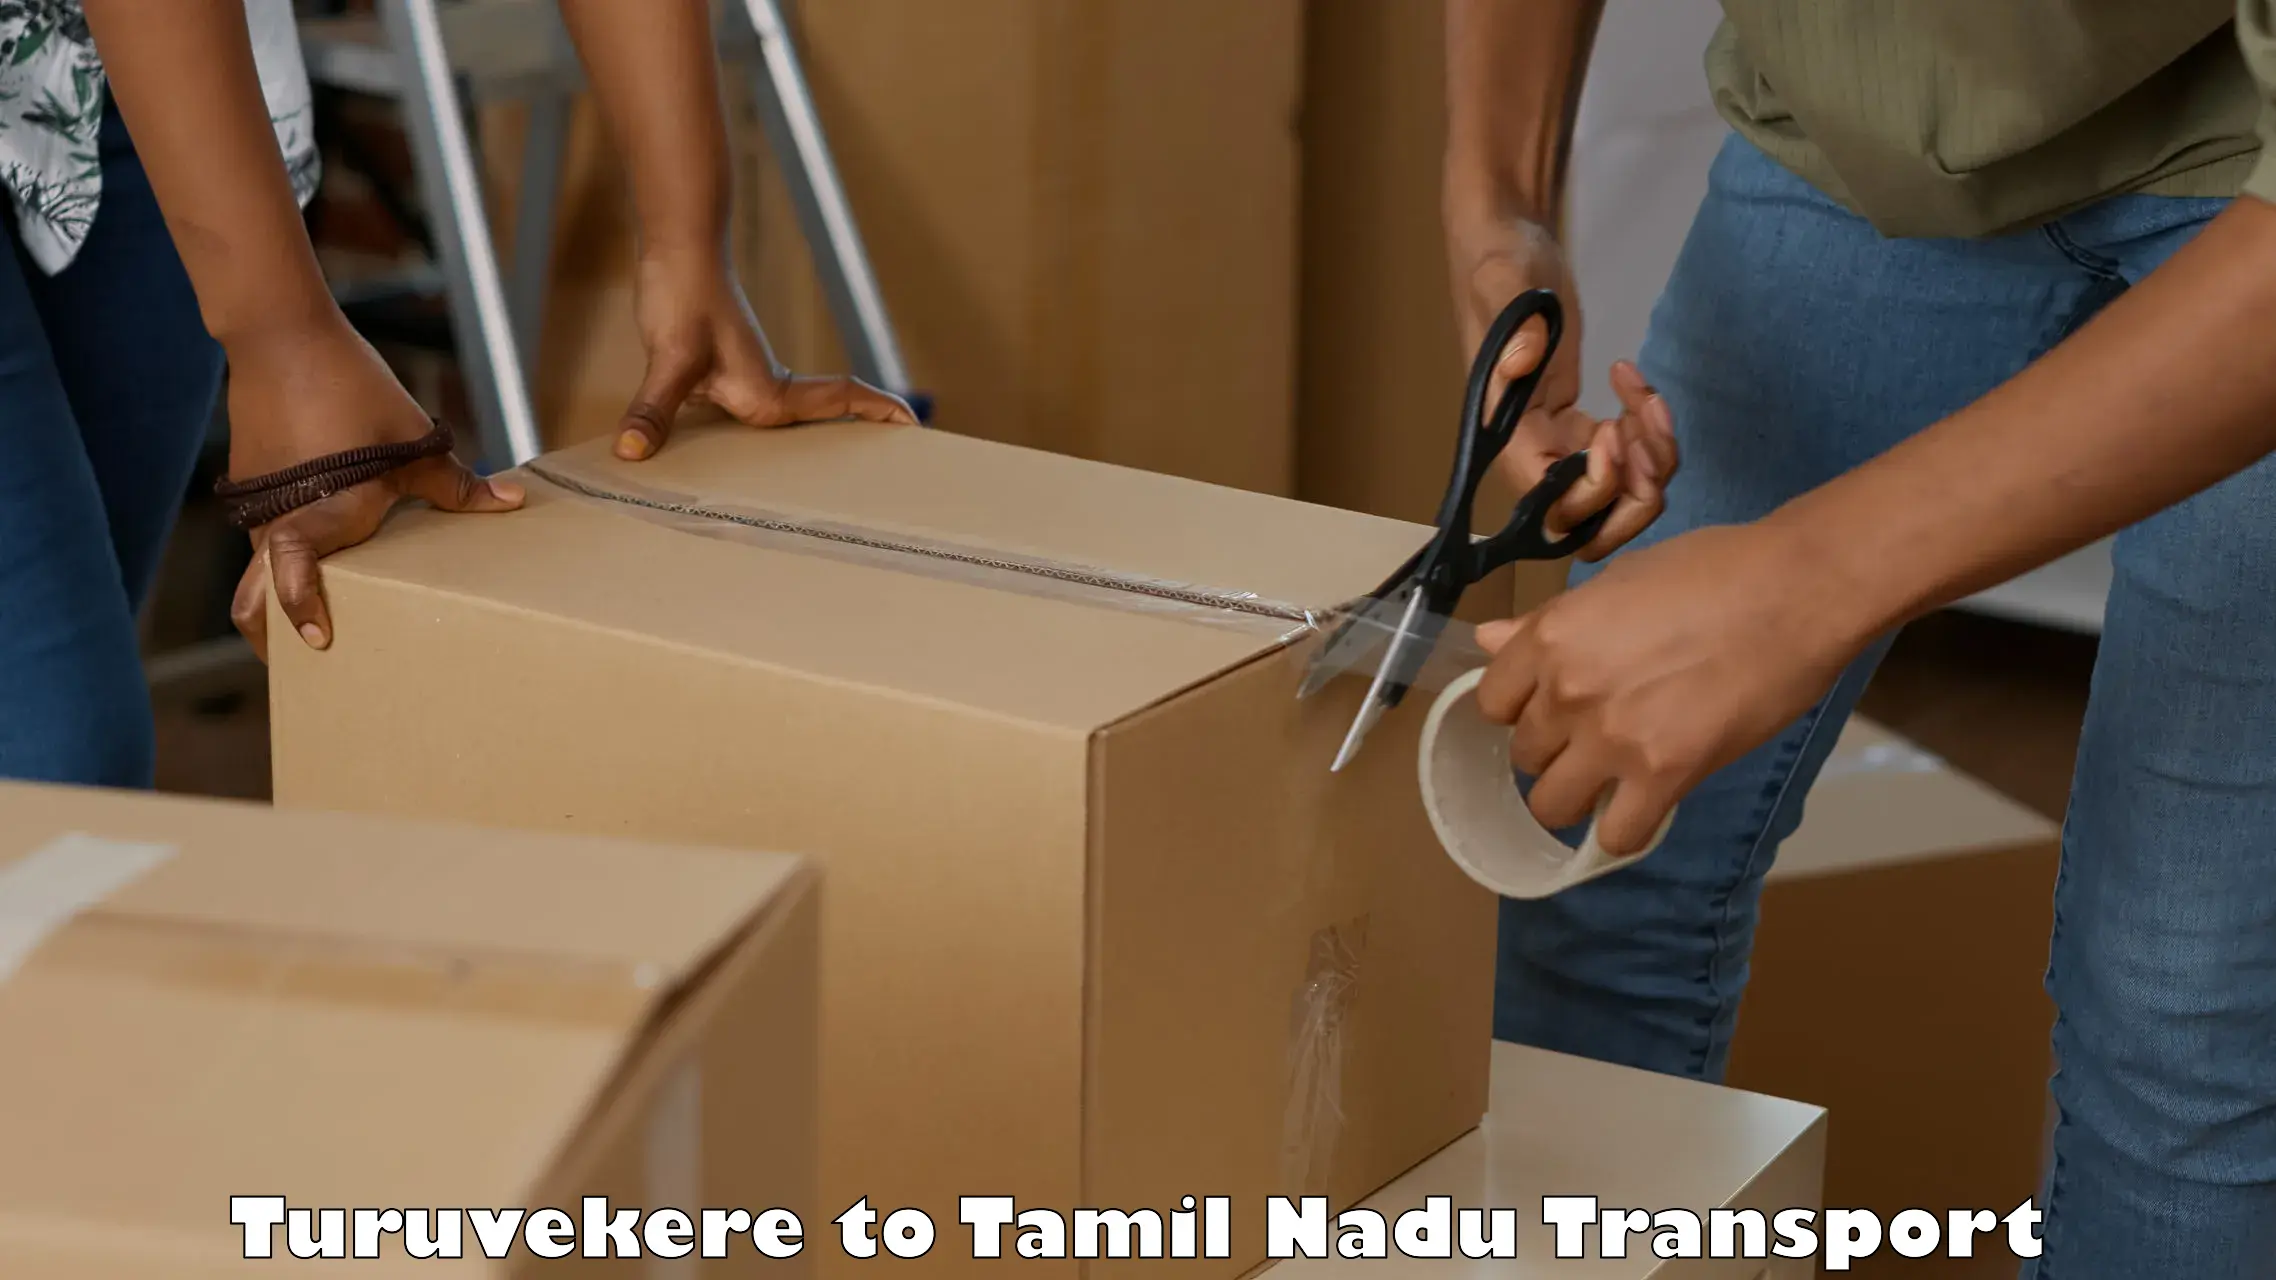 Truck transport companies in India Turuvekere to Oddanchatram